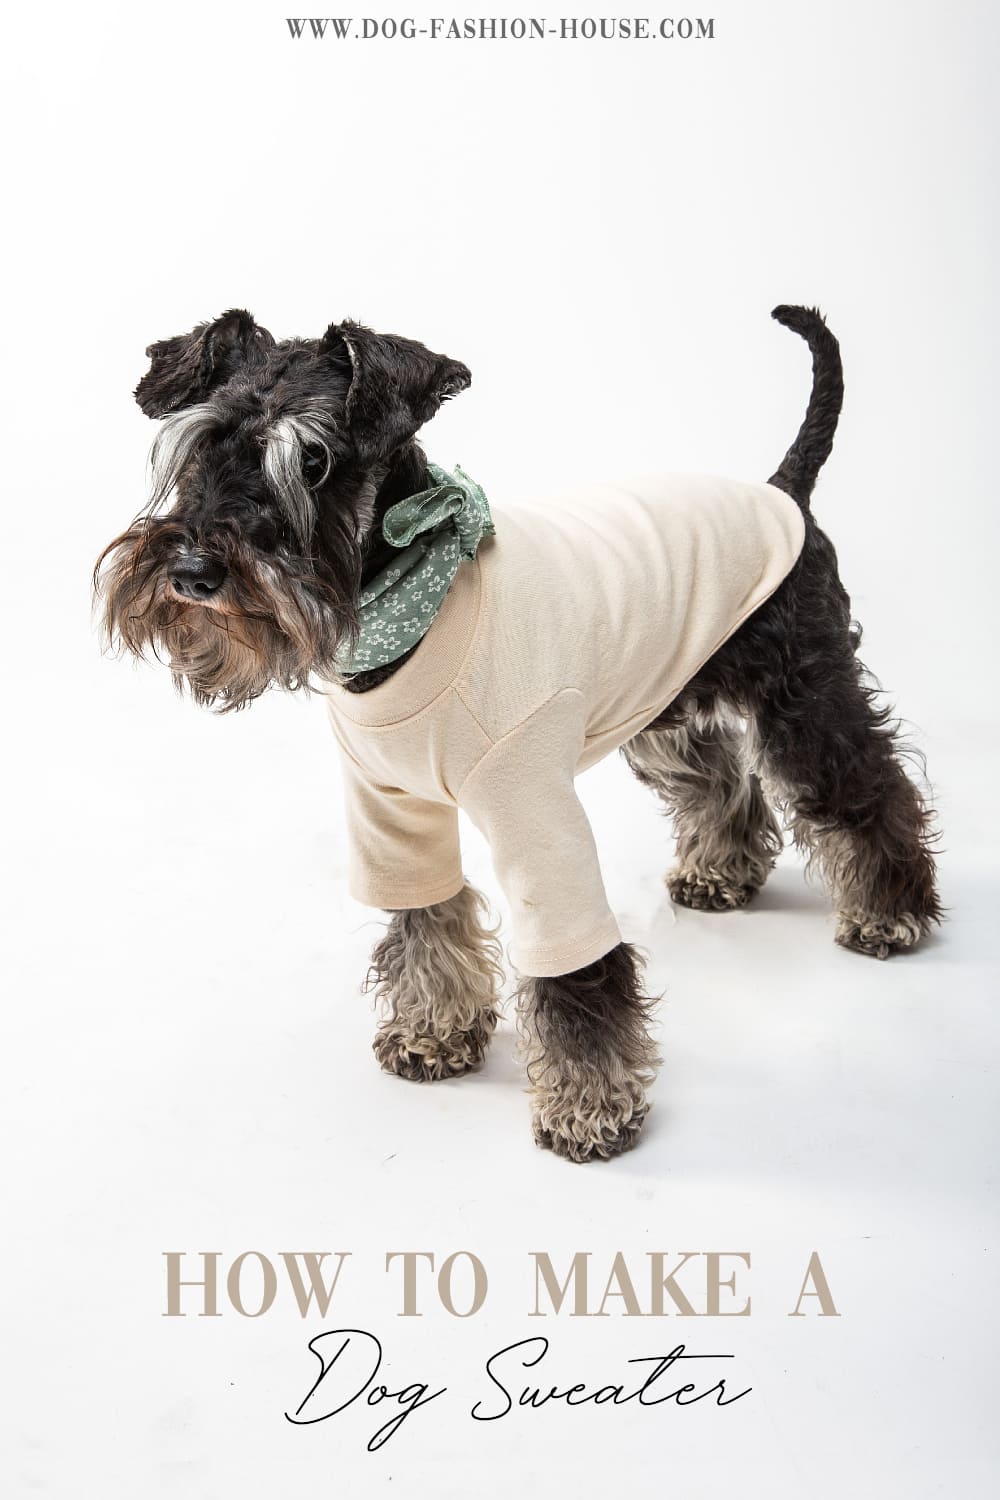 How To Make A Dog Sweater